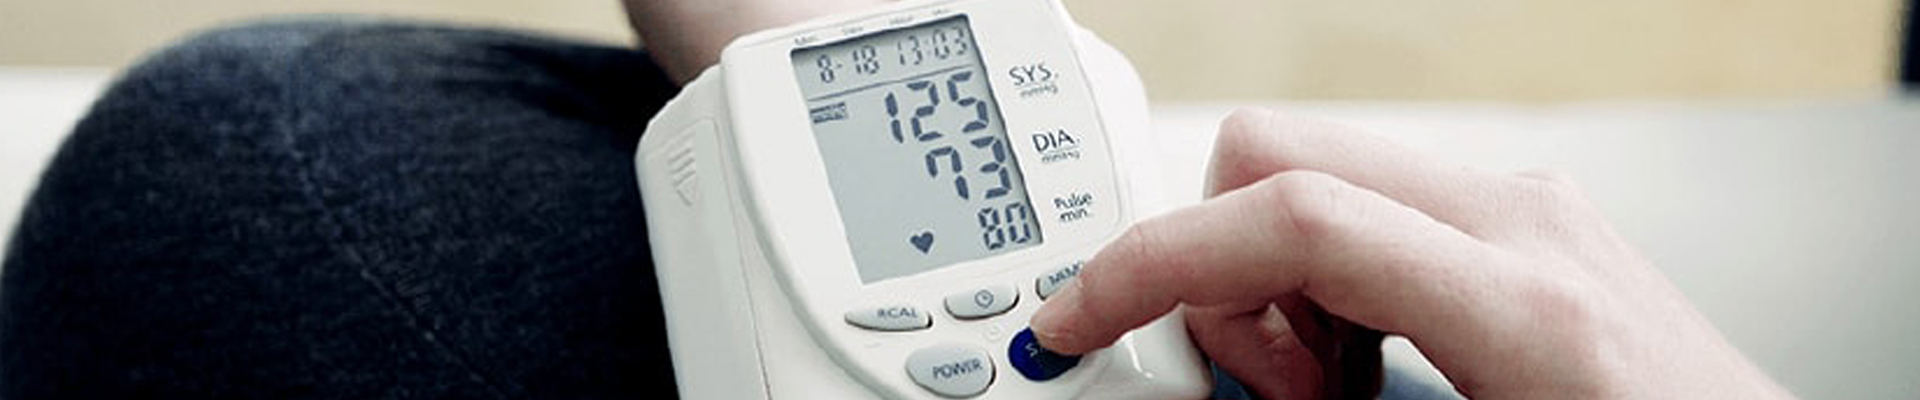 Know_Your_Health_Indicators_Blood_Pressure_Cholesterol_Blood_Sugar_and_BMI